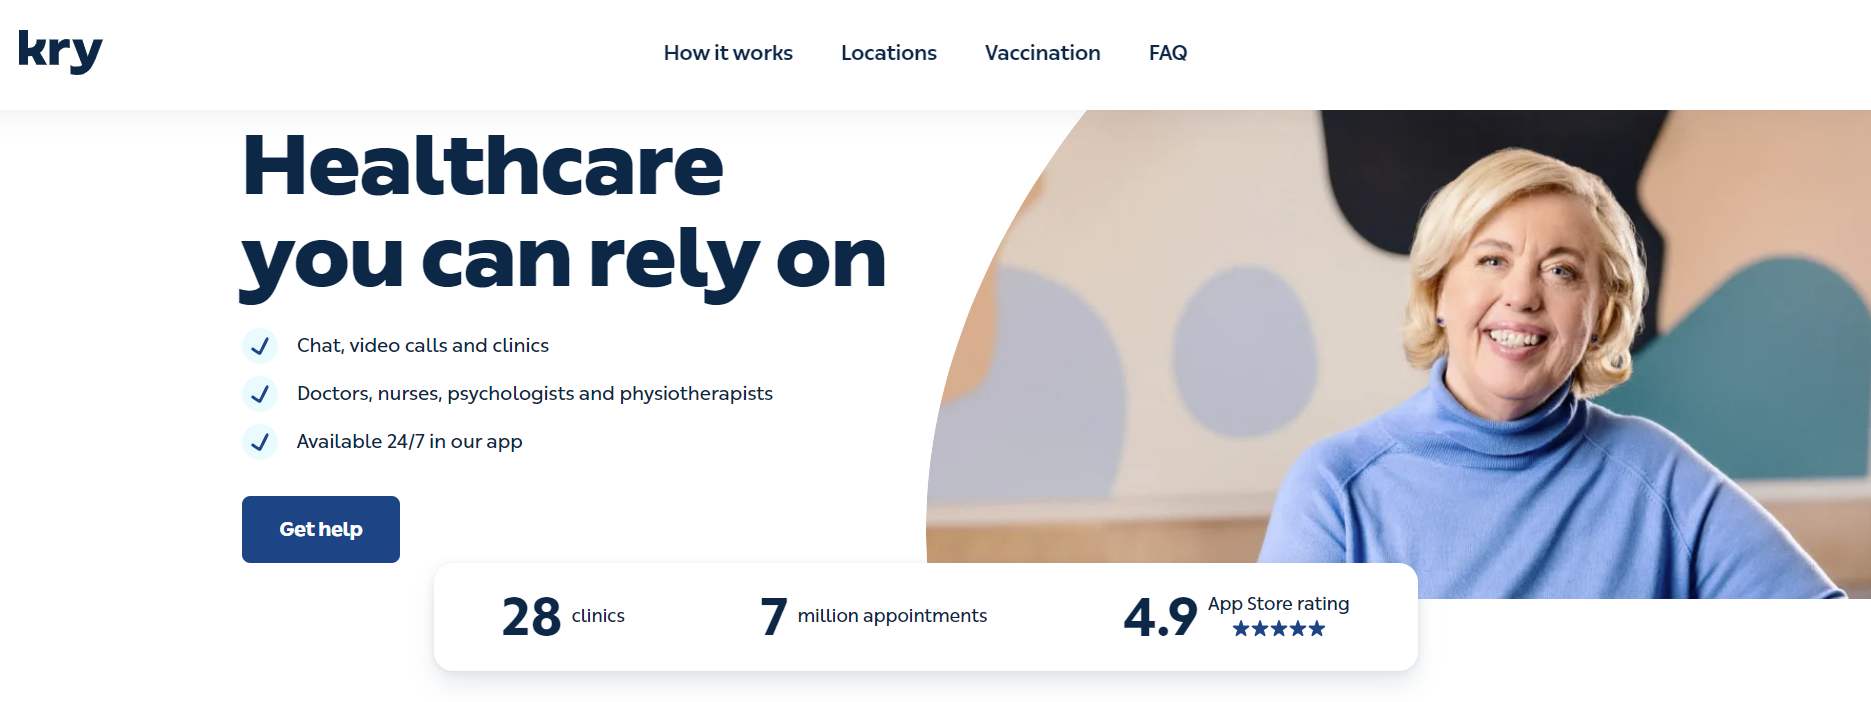 A screenshot of Kry homepage which says "Healthcare you can rely on. Chat, video calls and clinics. Doctors, nurses, psychologists and physiotherapists. Available 24/7 in our app